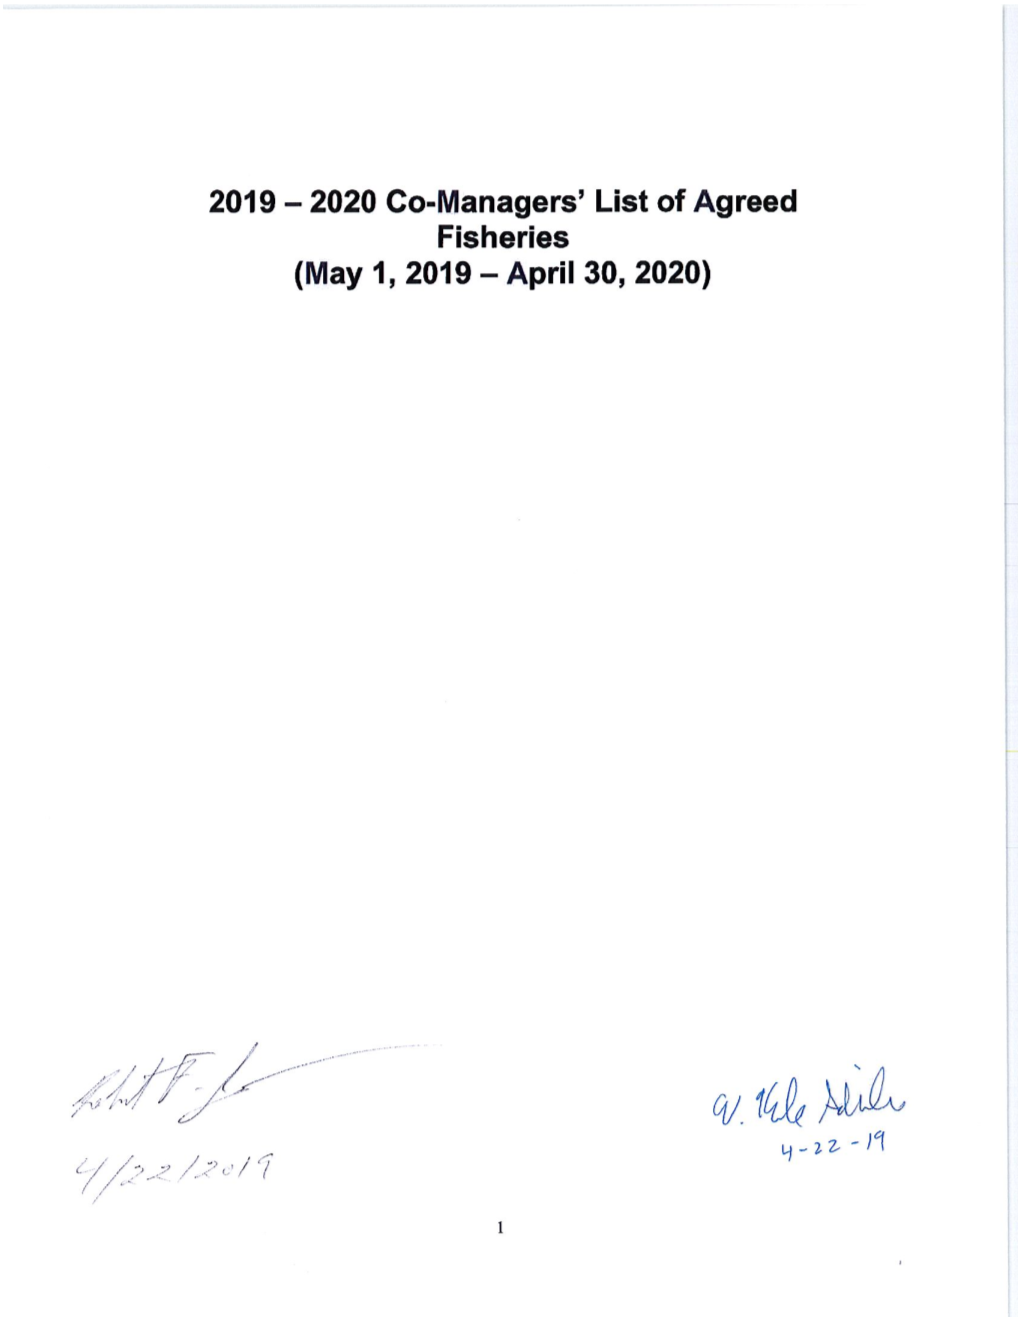 2019-2020 Co-Managers' List of Agreed Fisheries